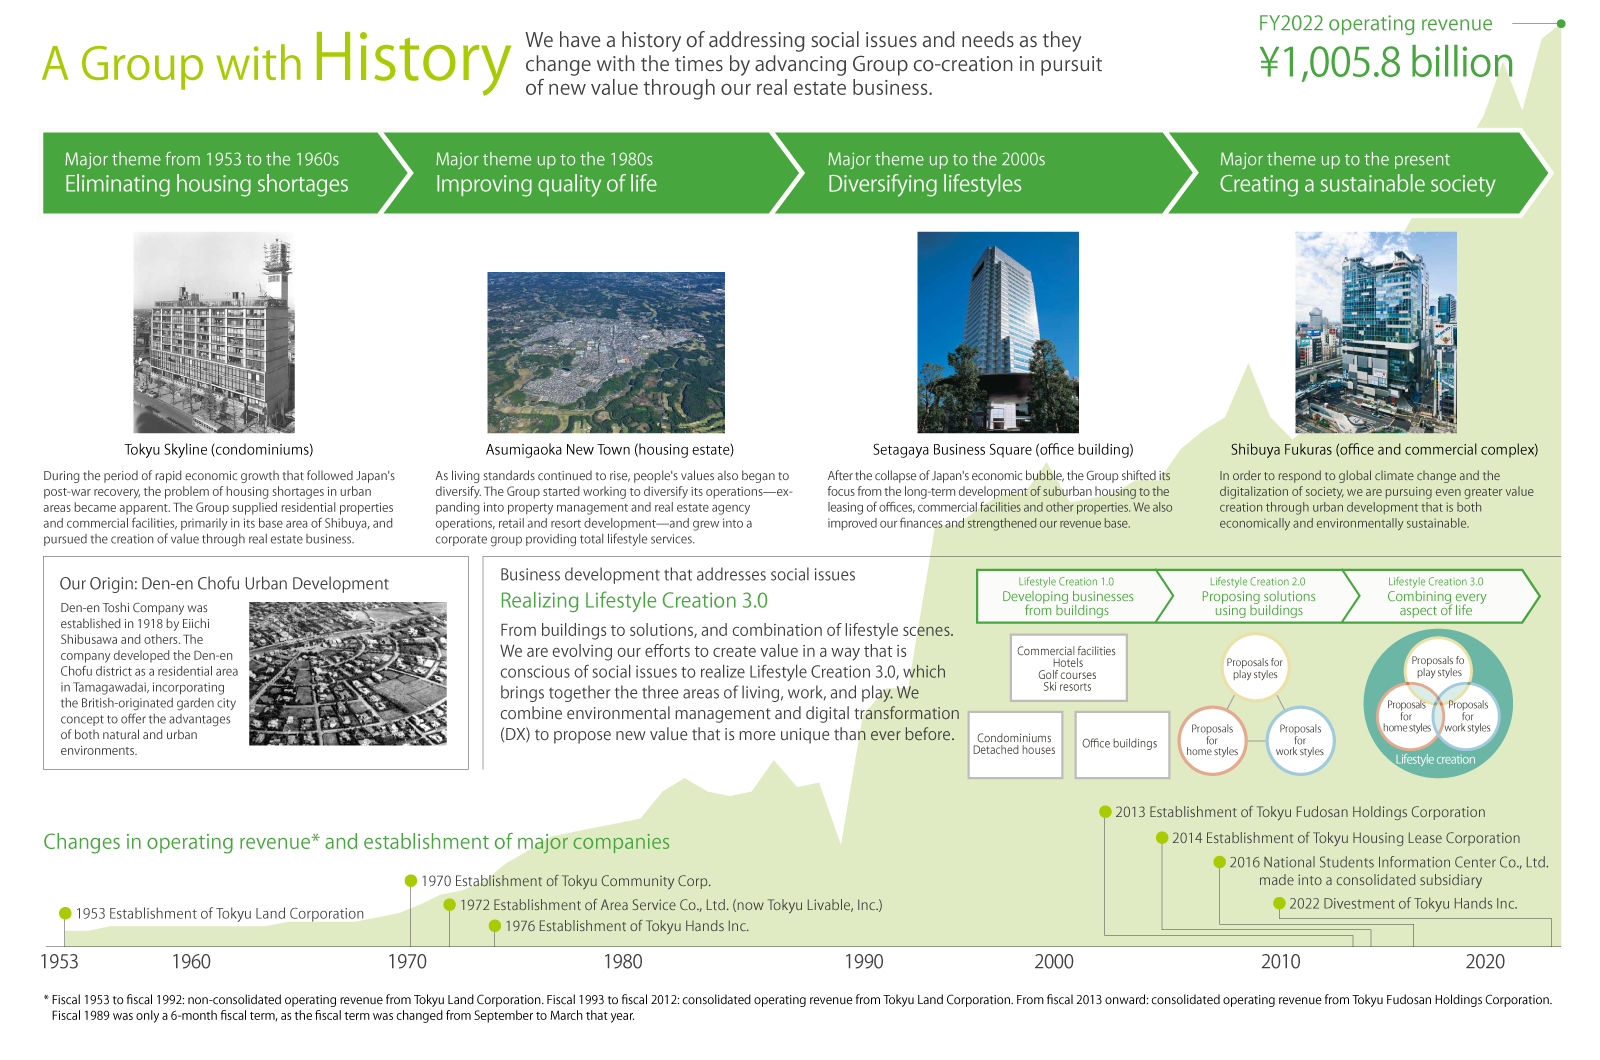 A History of Value Creation